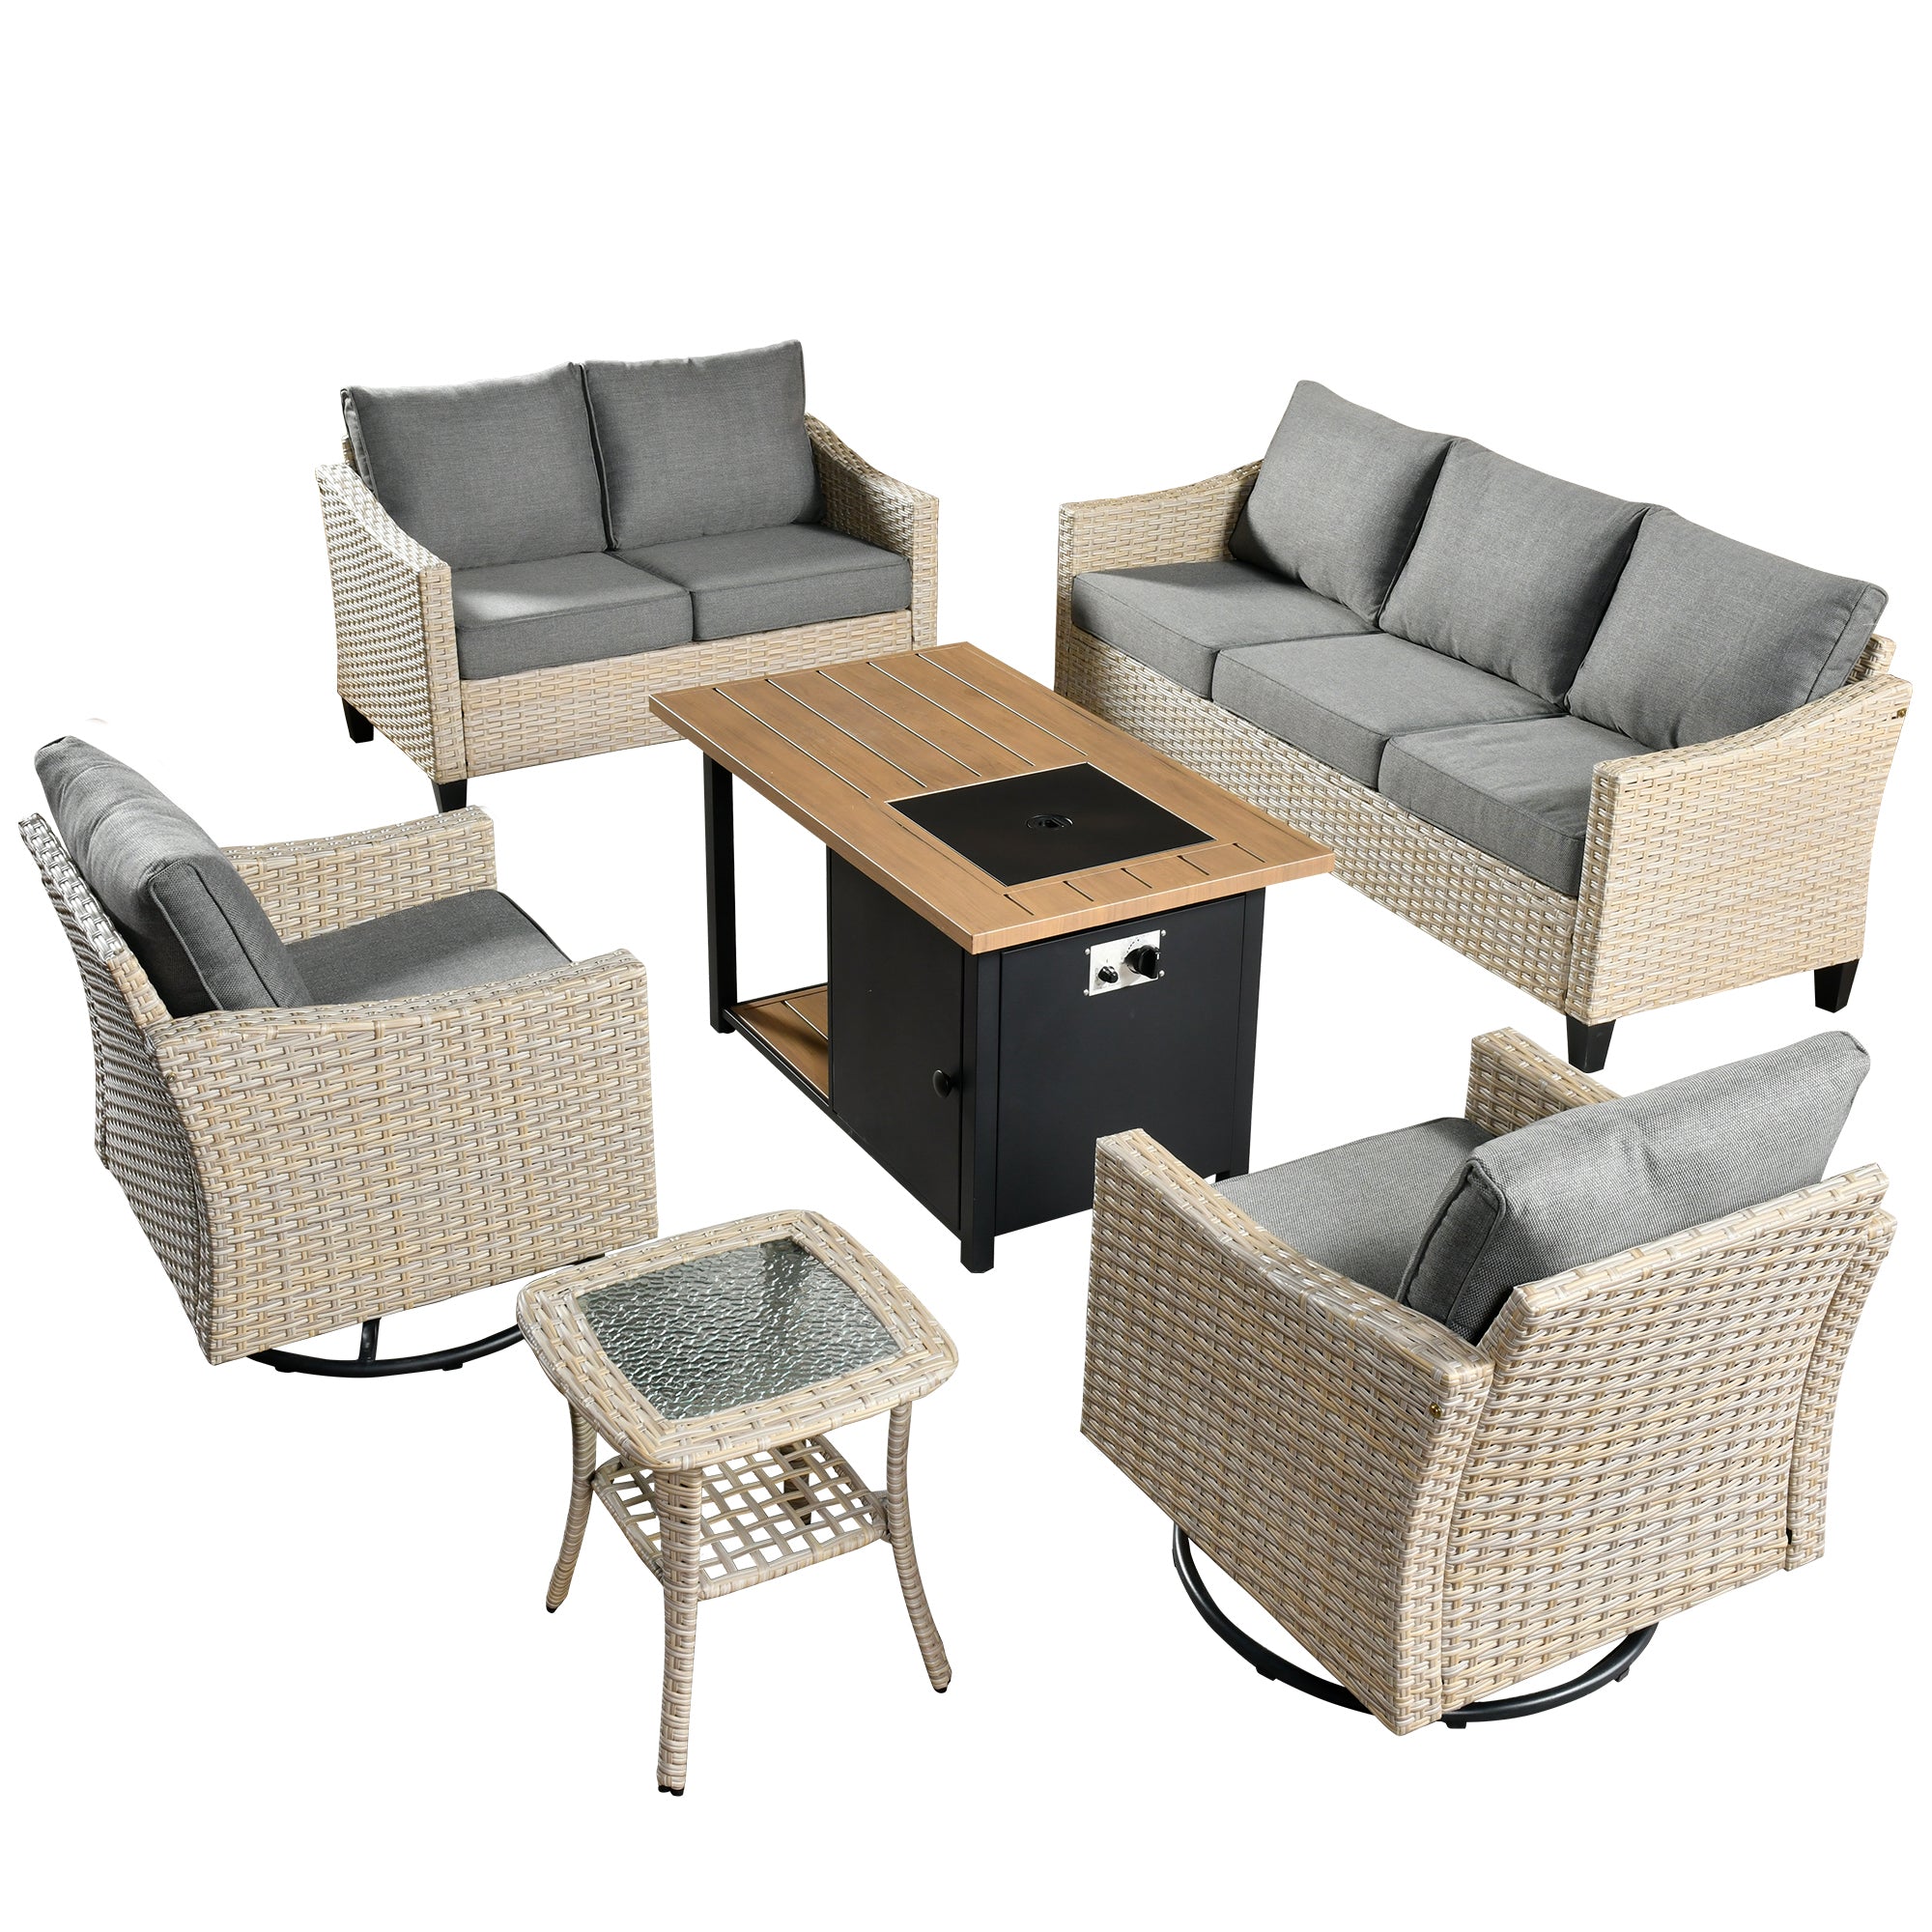 Ovios Athena Series Outdoor Furniture Sets 6-Piece include Swivel Chair & 46'' Fire Pit Table